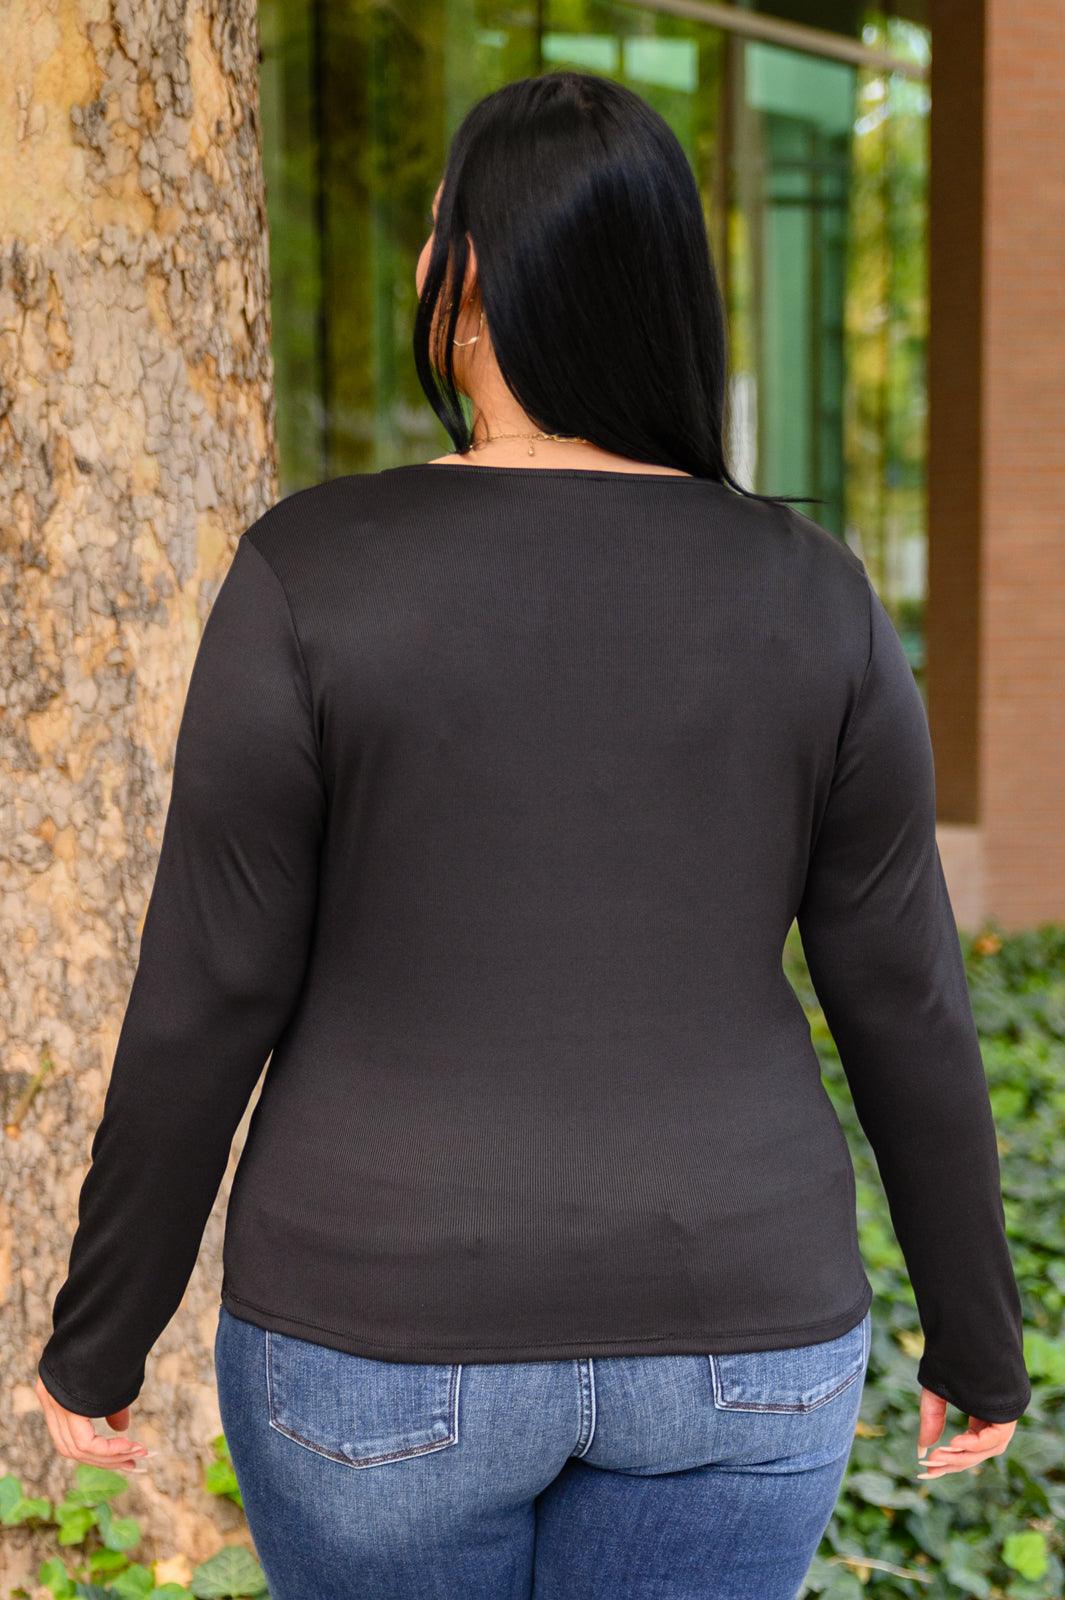 Can You Believe It Basic Long Sleeve Top In Black Womens Ave Shops   